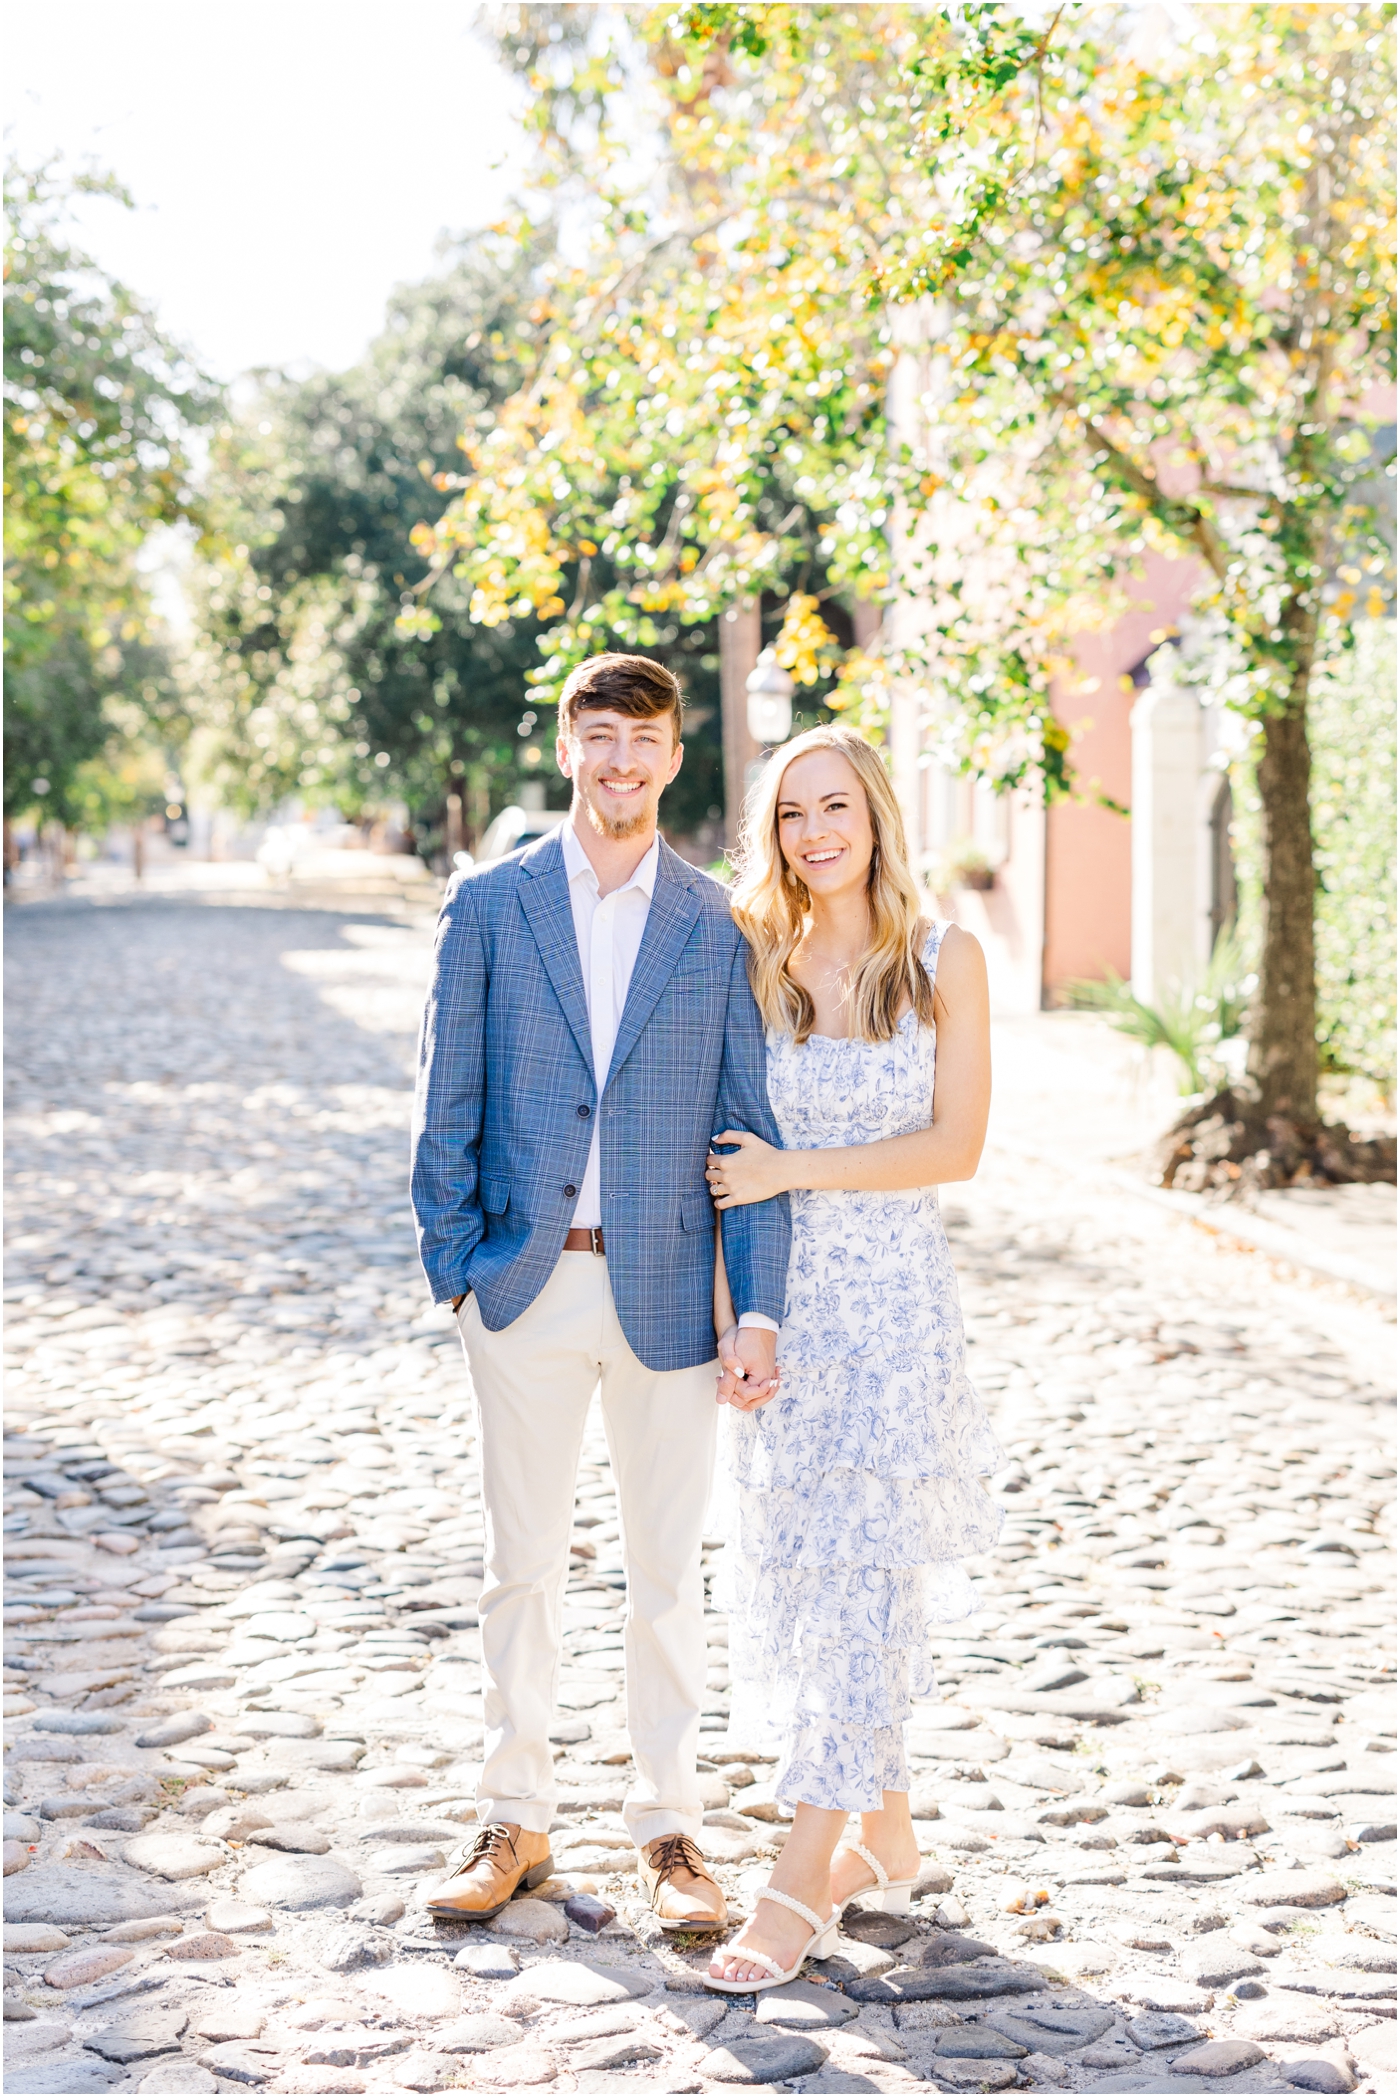 Chalmers St engagement photos in Charleston, South Carolina